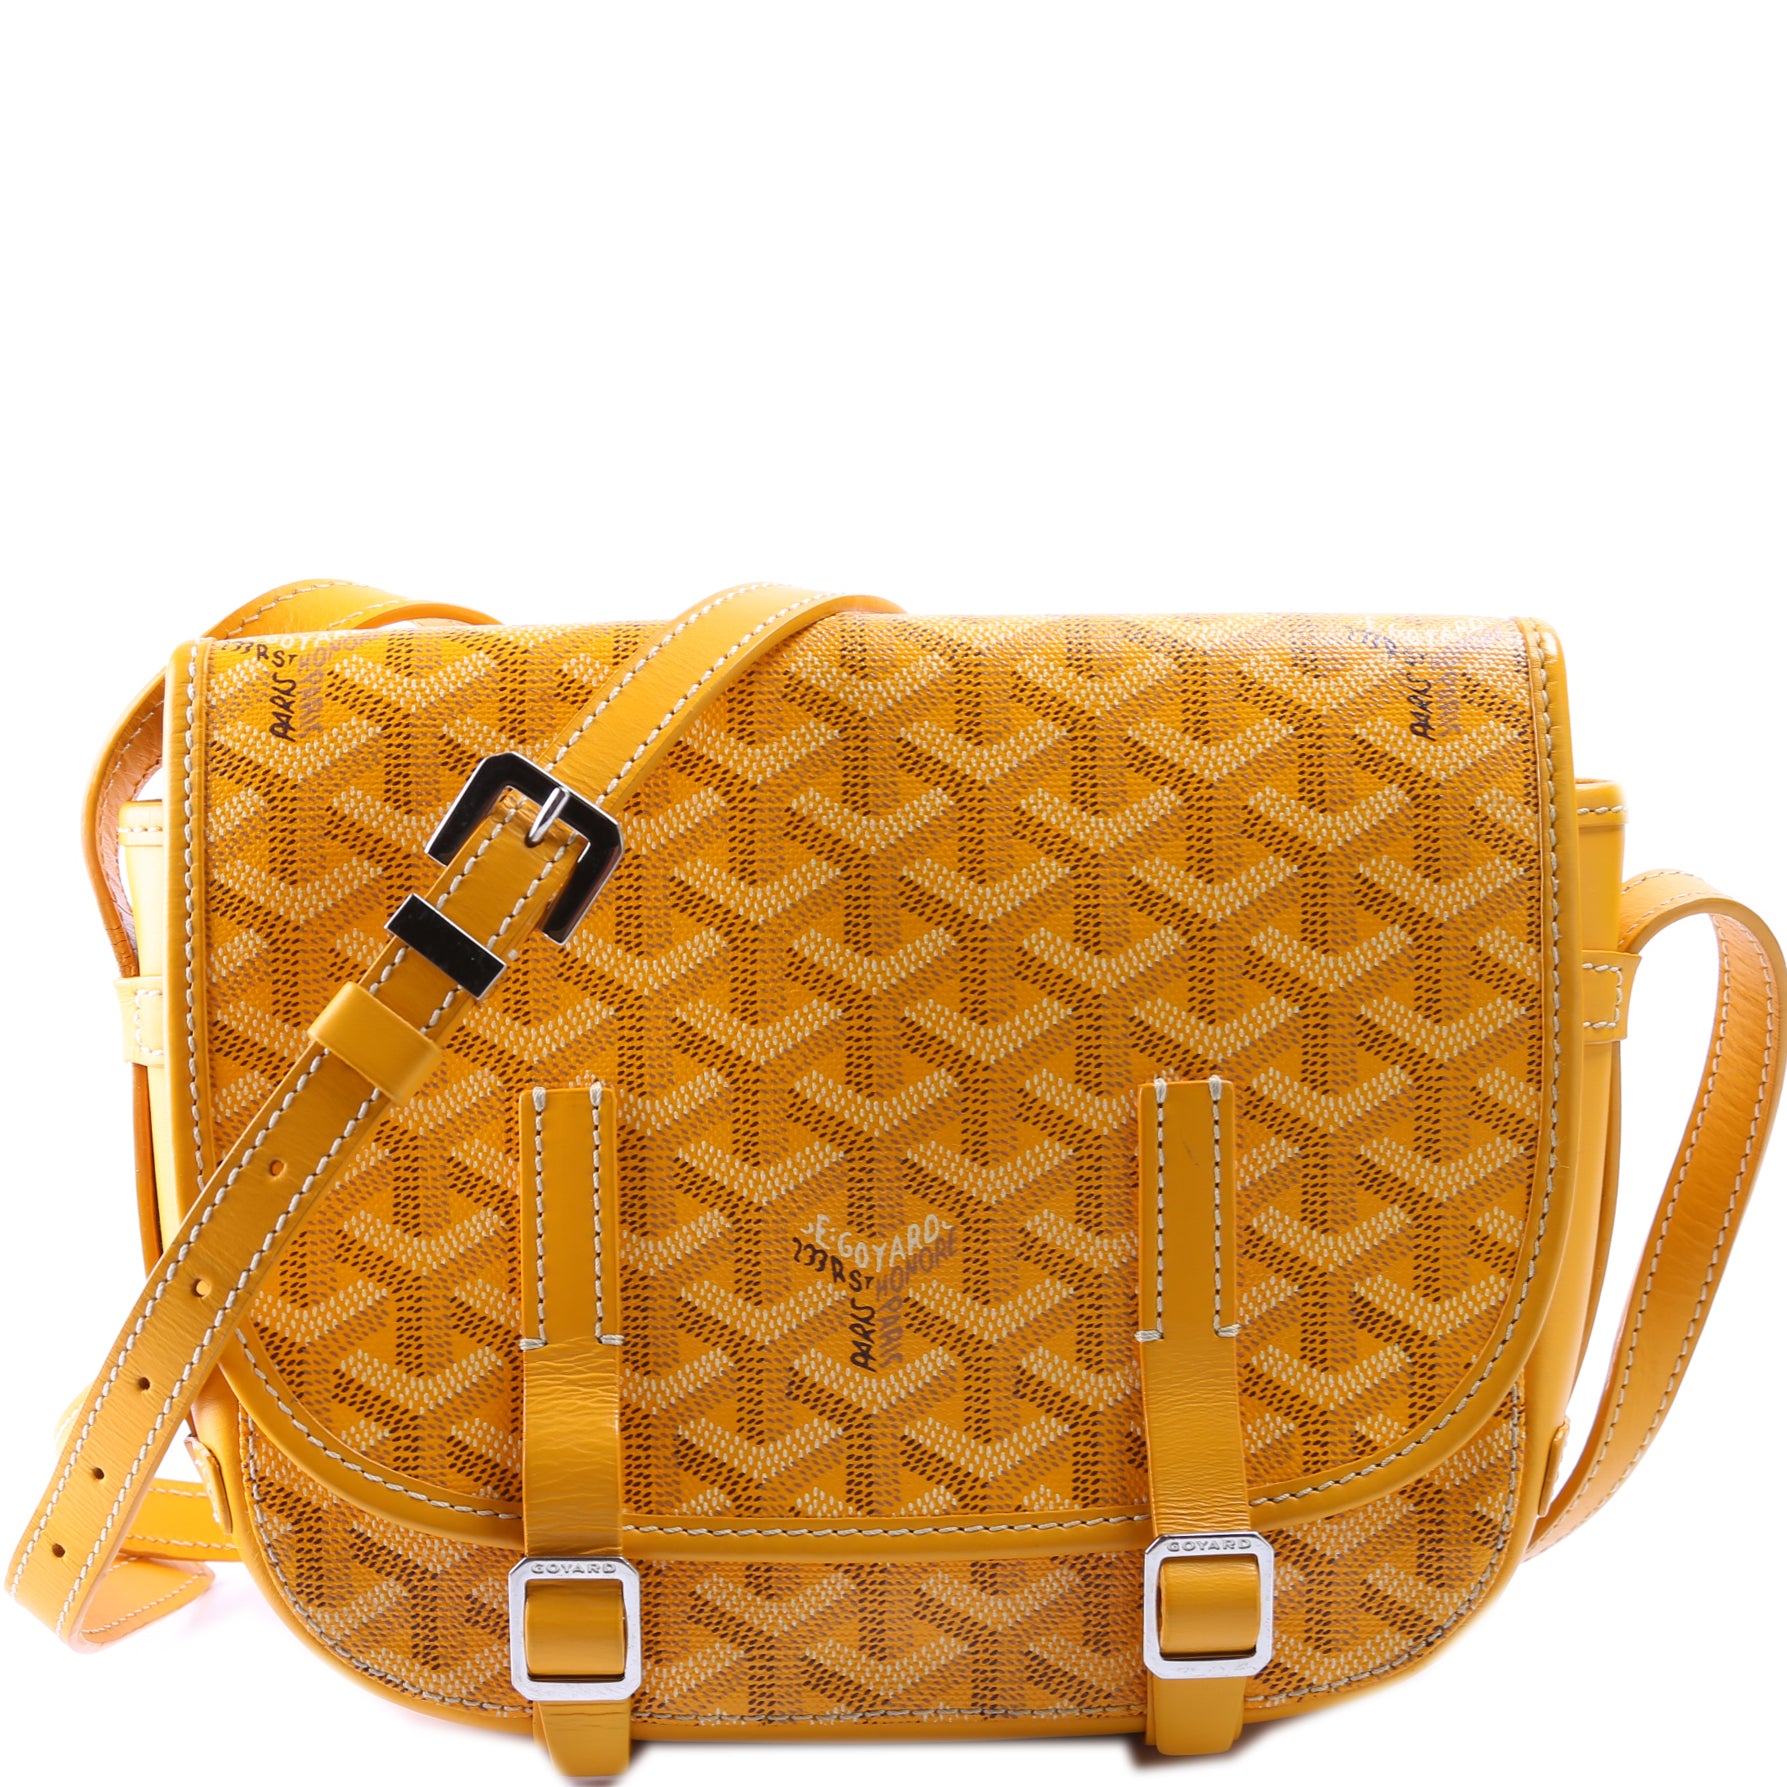 Pre-owned Goyard Belvedere Pm Yellow